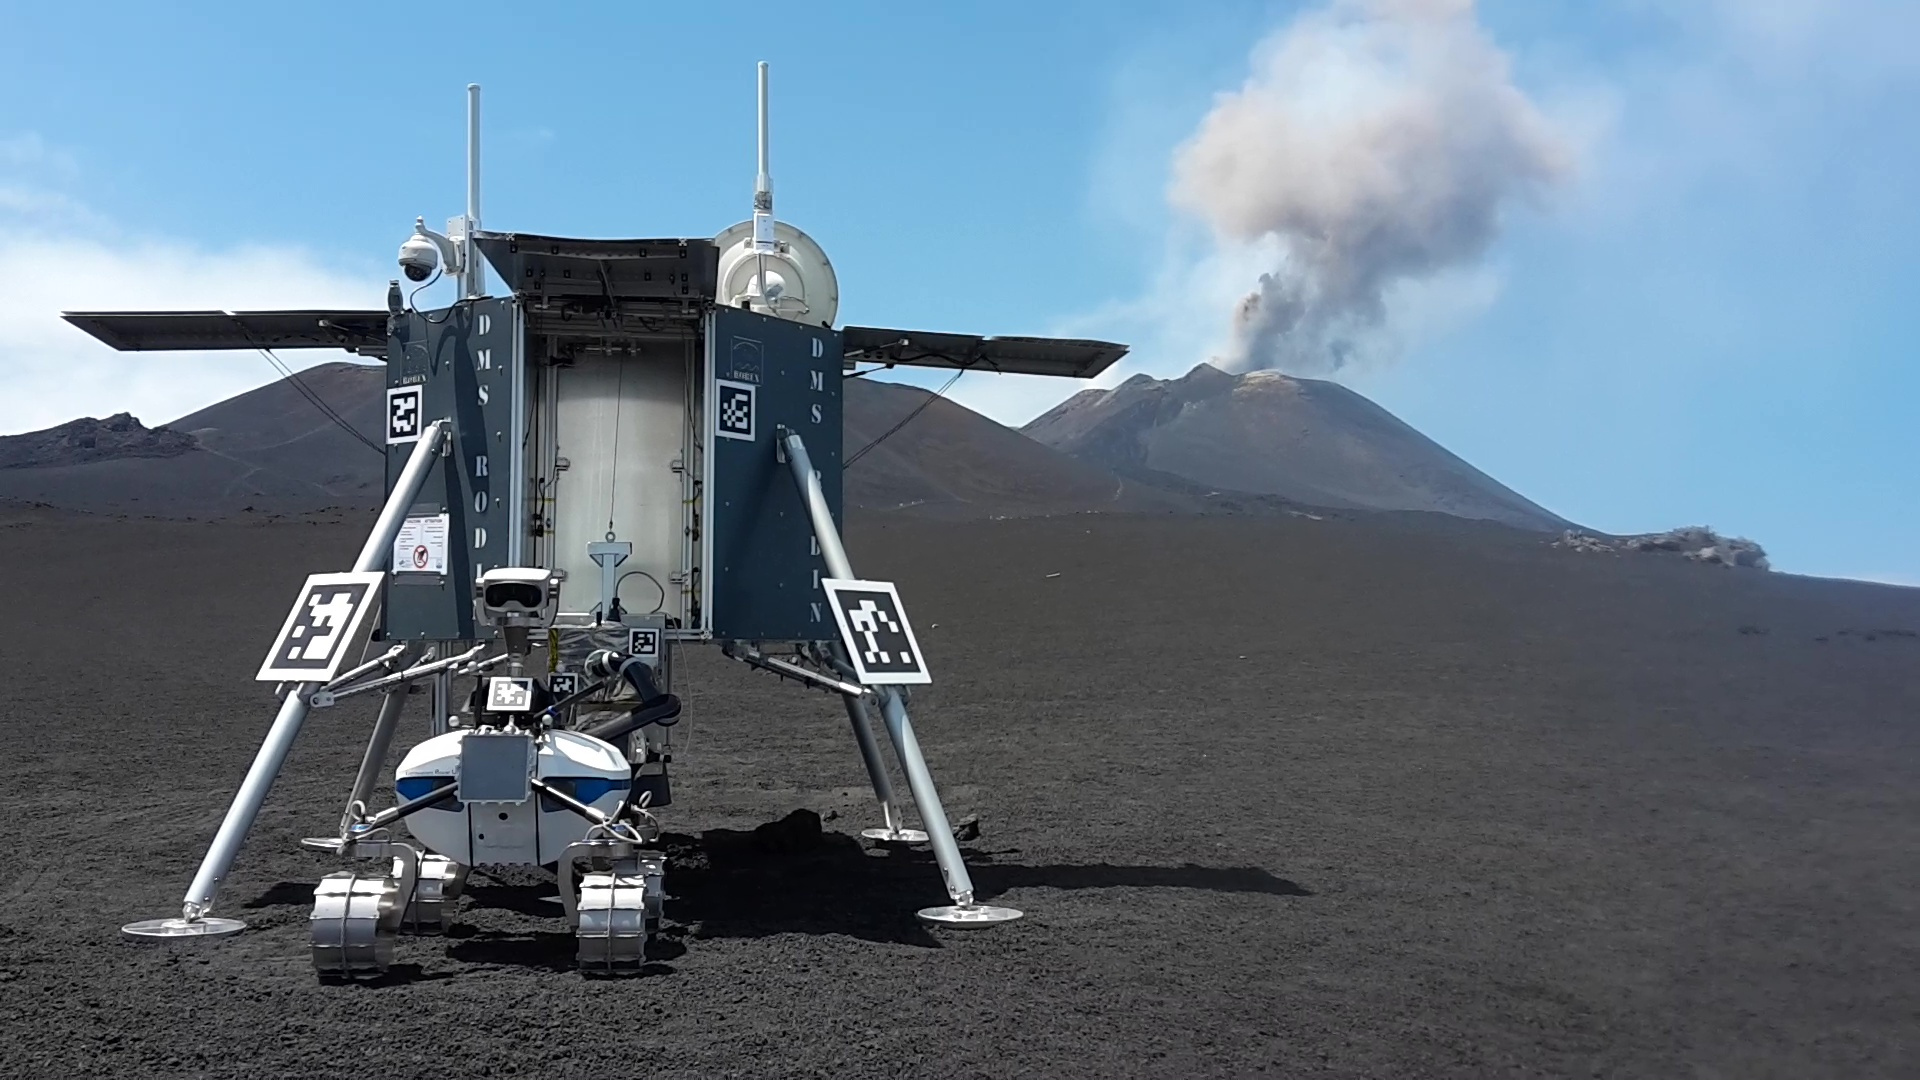 Rover and Lander in front of the vulcano Mt. Etna 2017